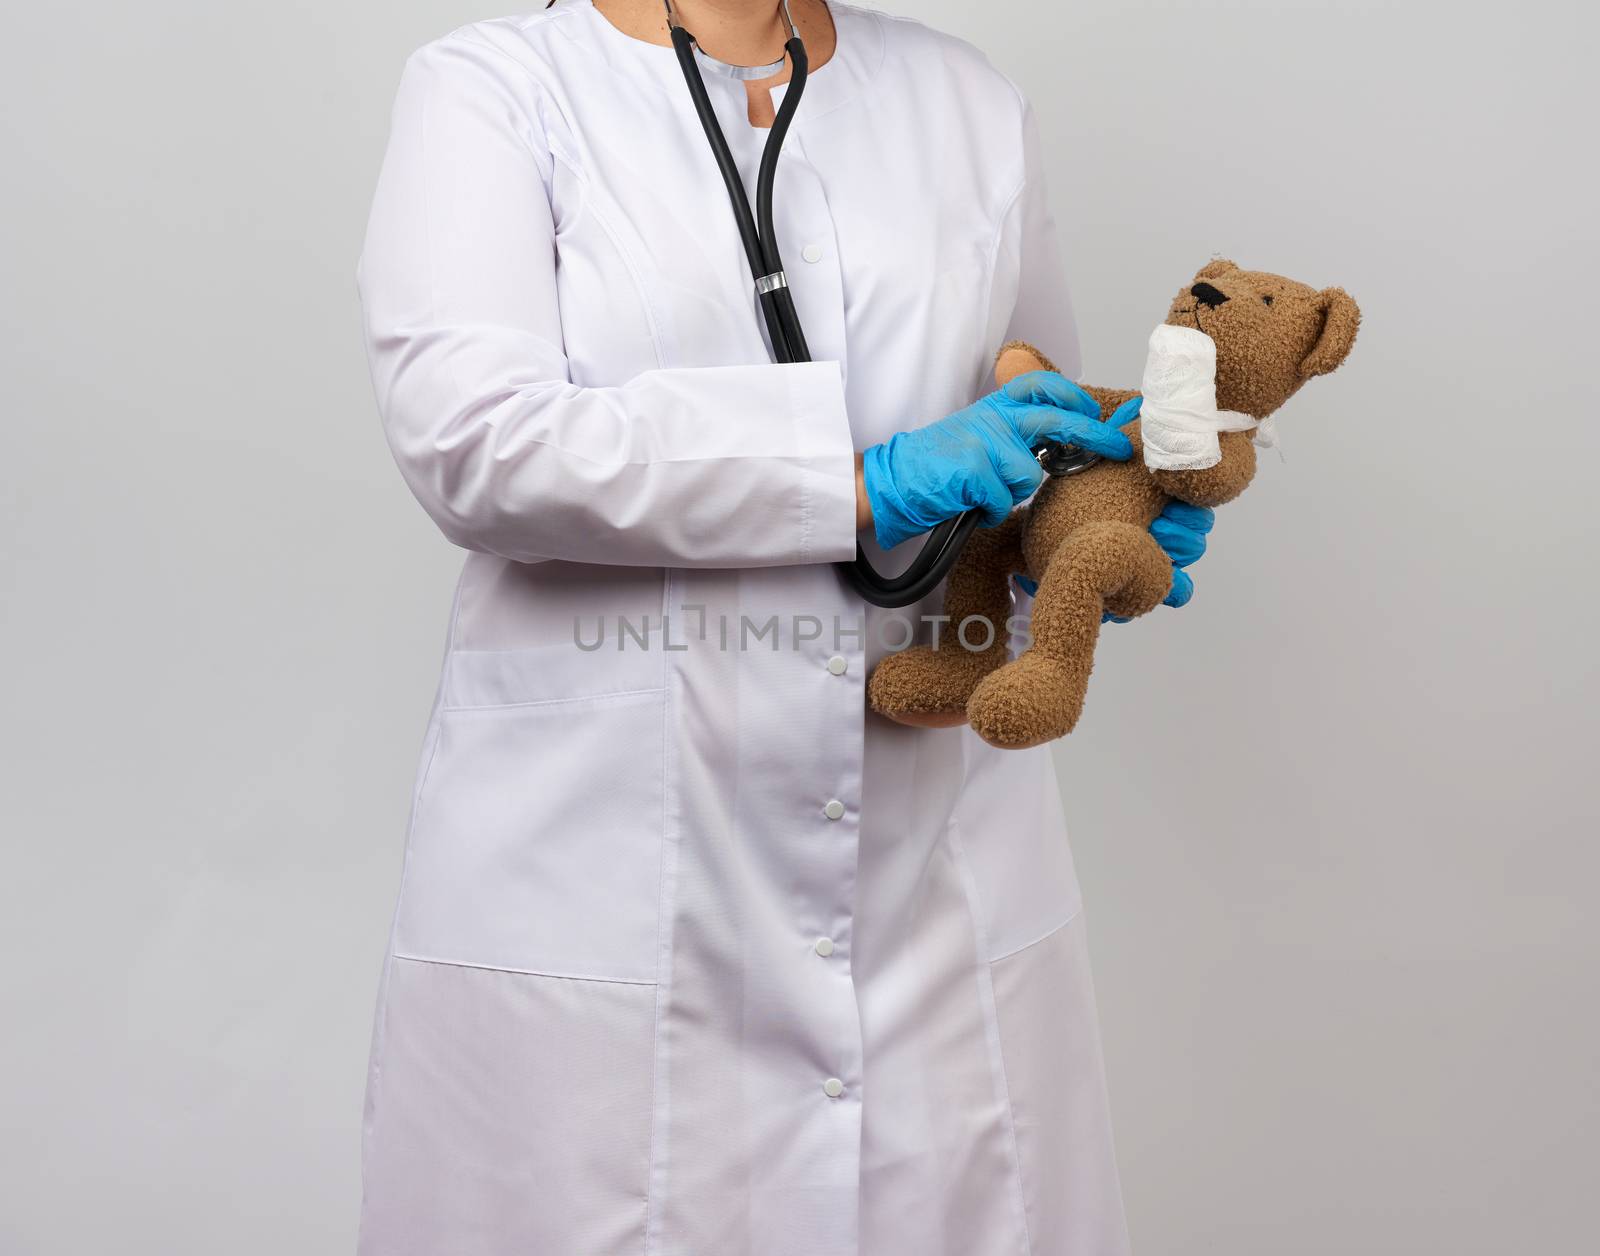 female medic holds brown teddy bear with paw bandaged in white bandage and listens to toy with stethoscope, concept of pediatrics and animal treatment